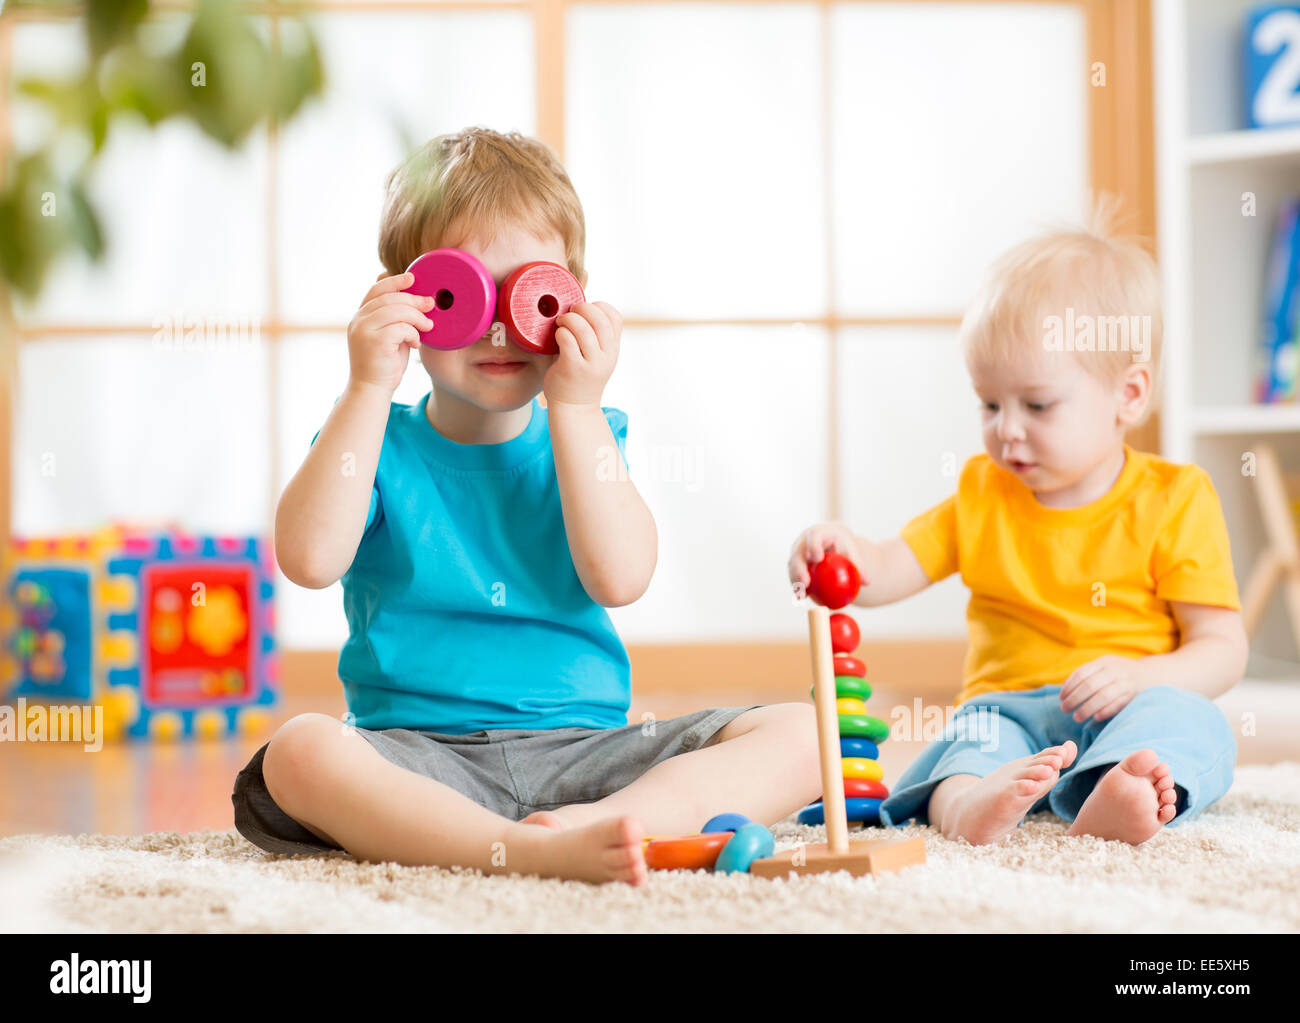 children boys playing with educational toys Stock Photo